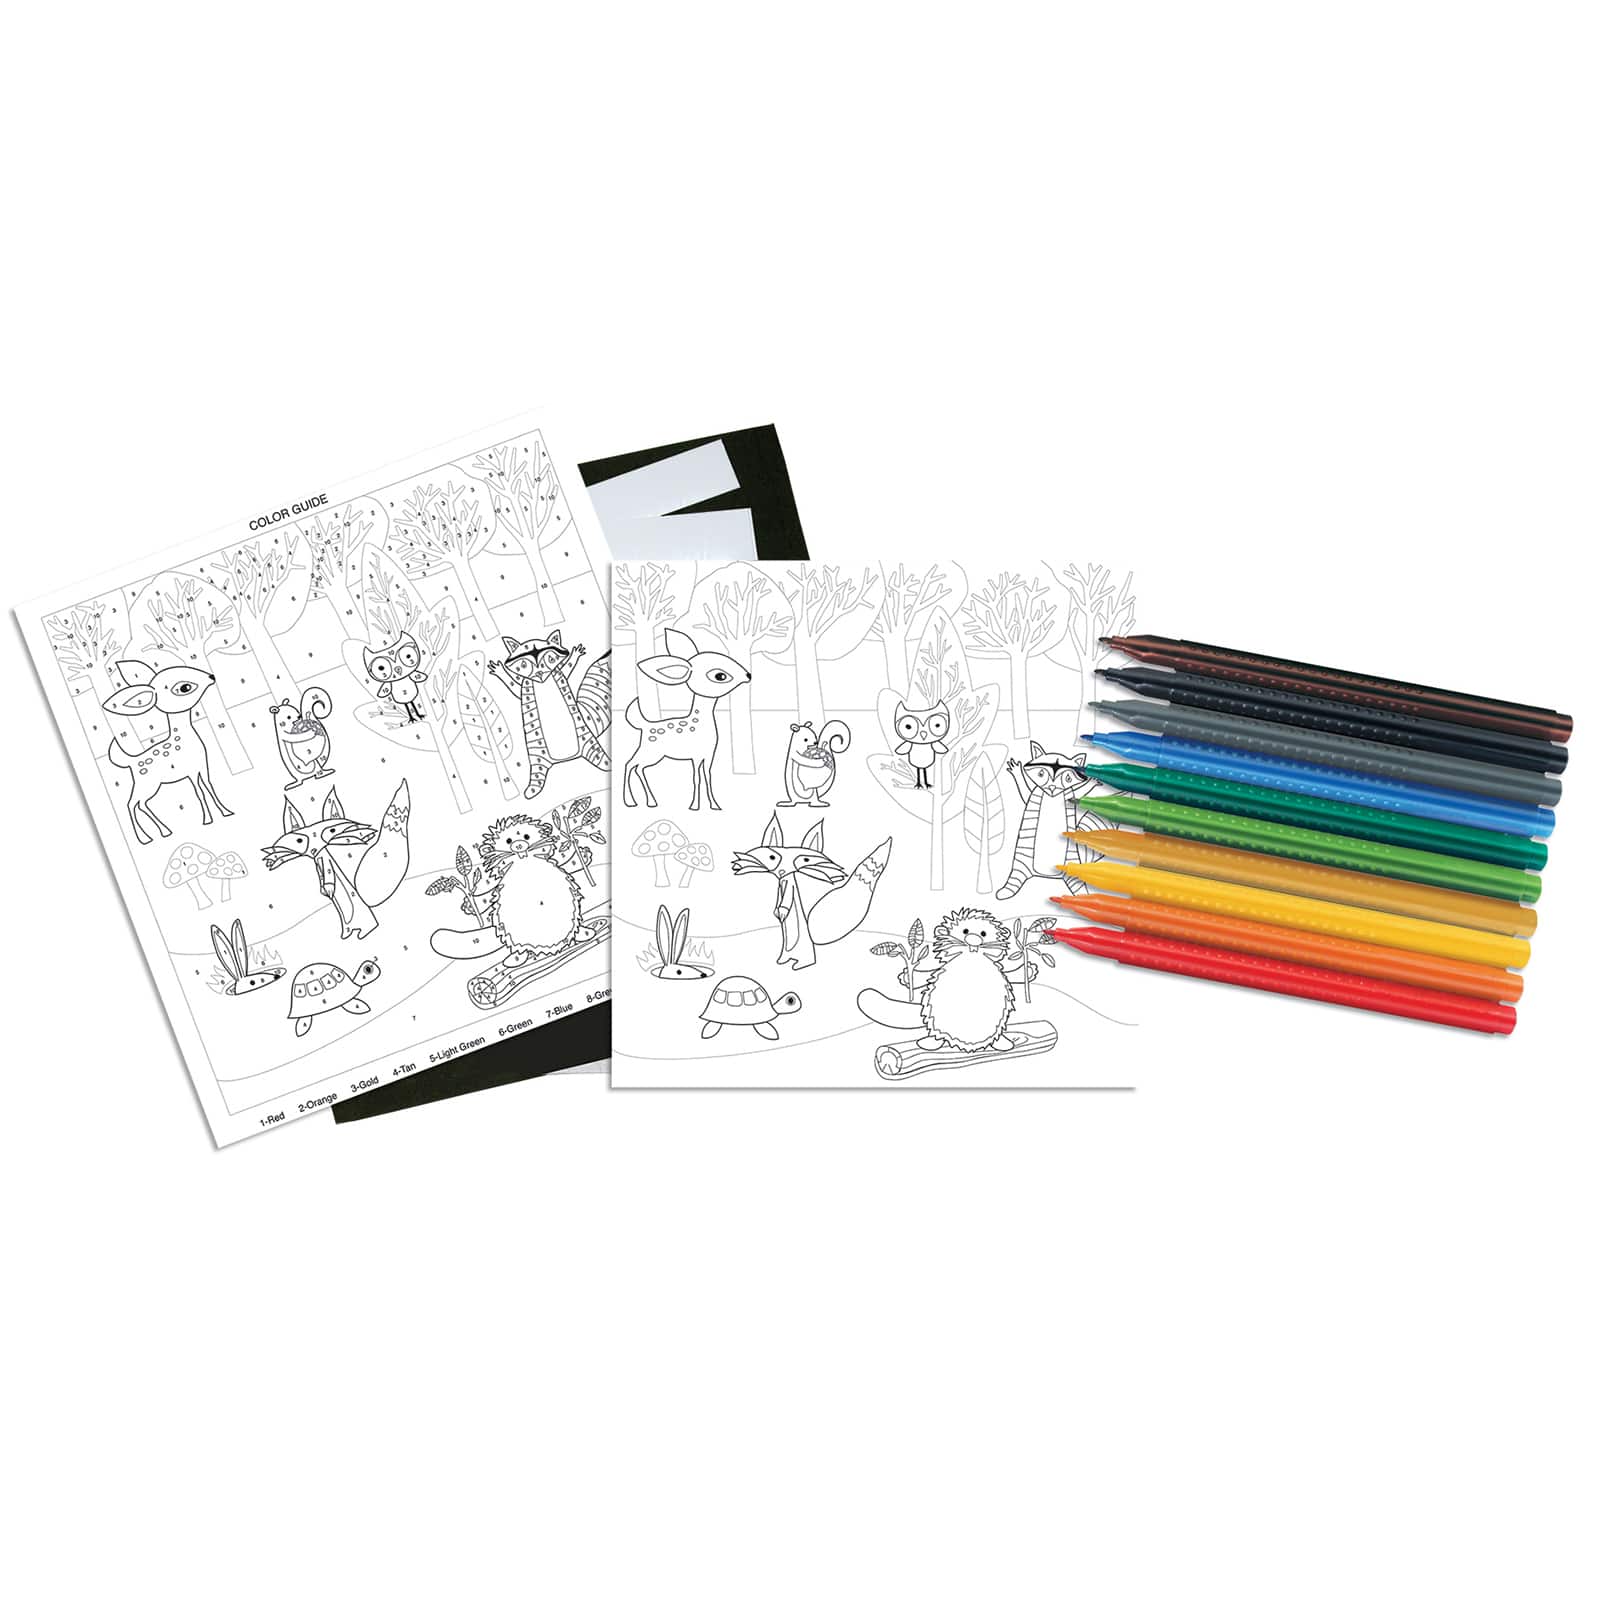 Find The Faber Castell Foil Fun Paint By Number Set Unicorn At Michaels